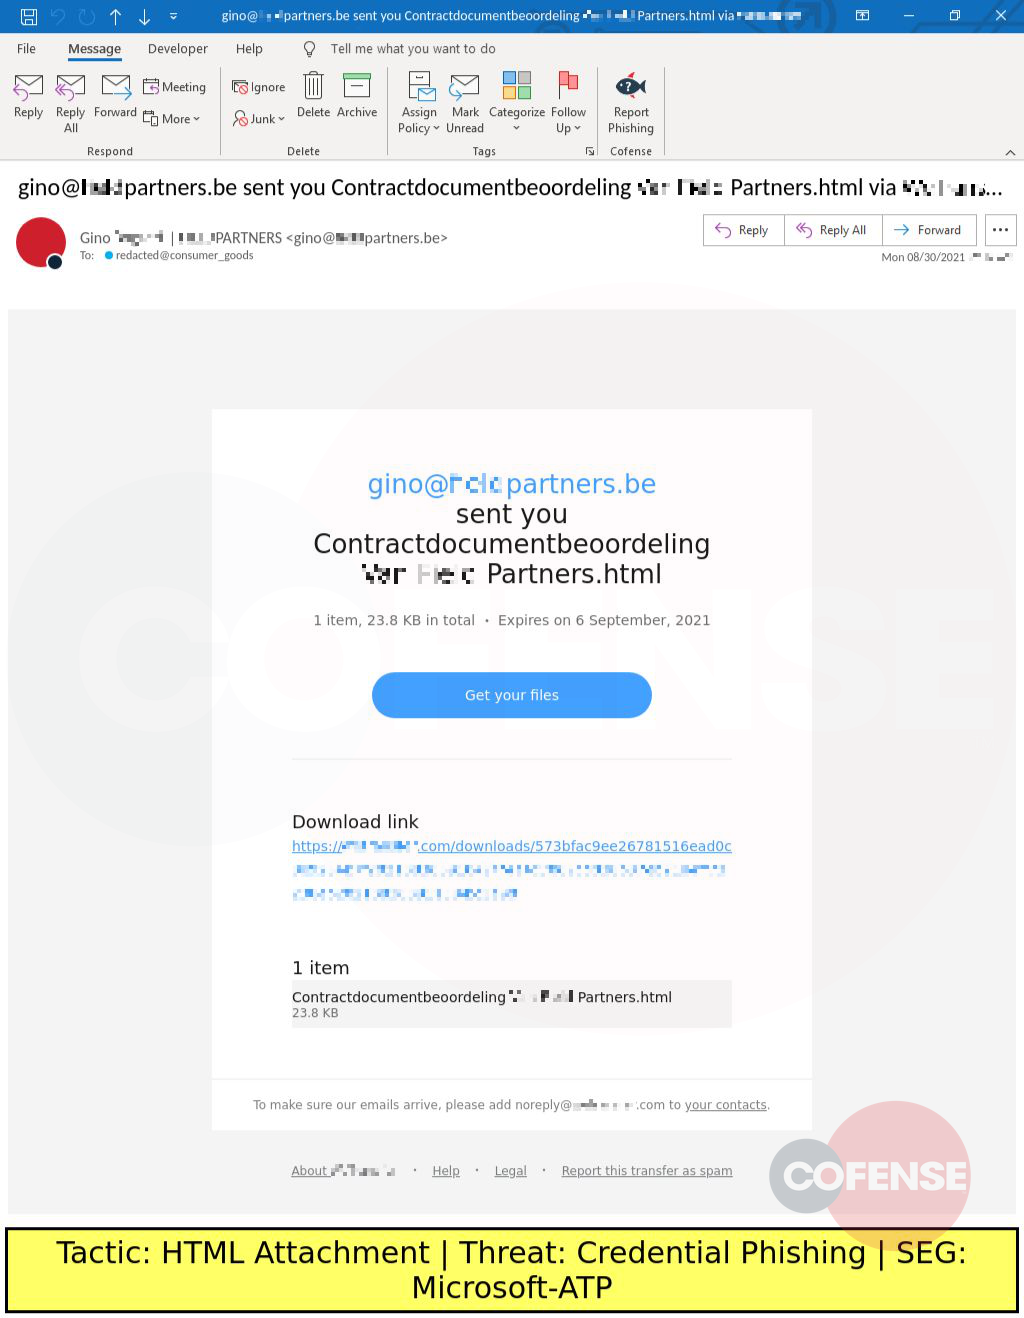 Real Phishing Example: WeTransfer-spoofed emails found in environments protected by Microsoft-ATP deliver Credential Phishing via an attached HTML file.